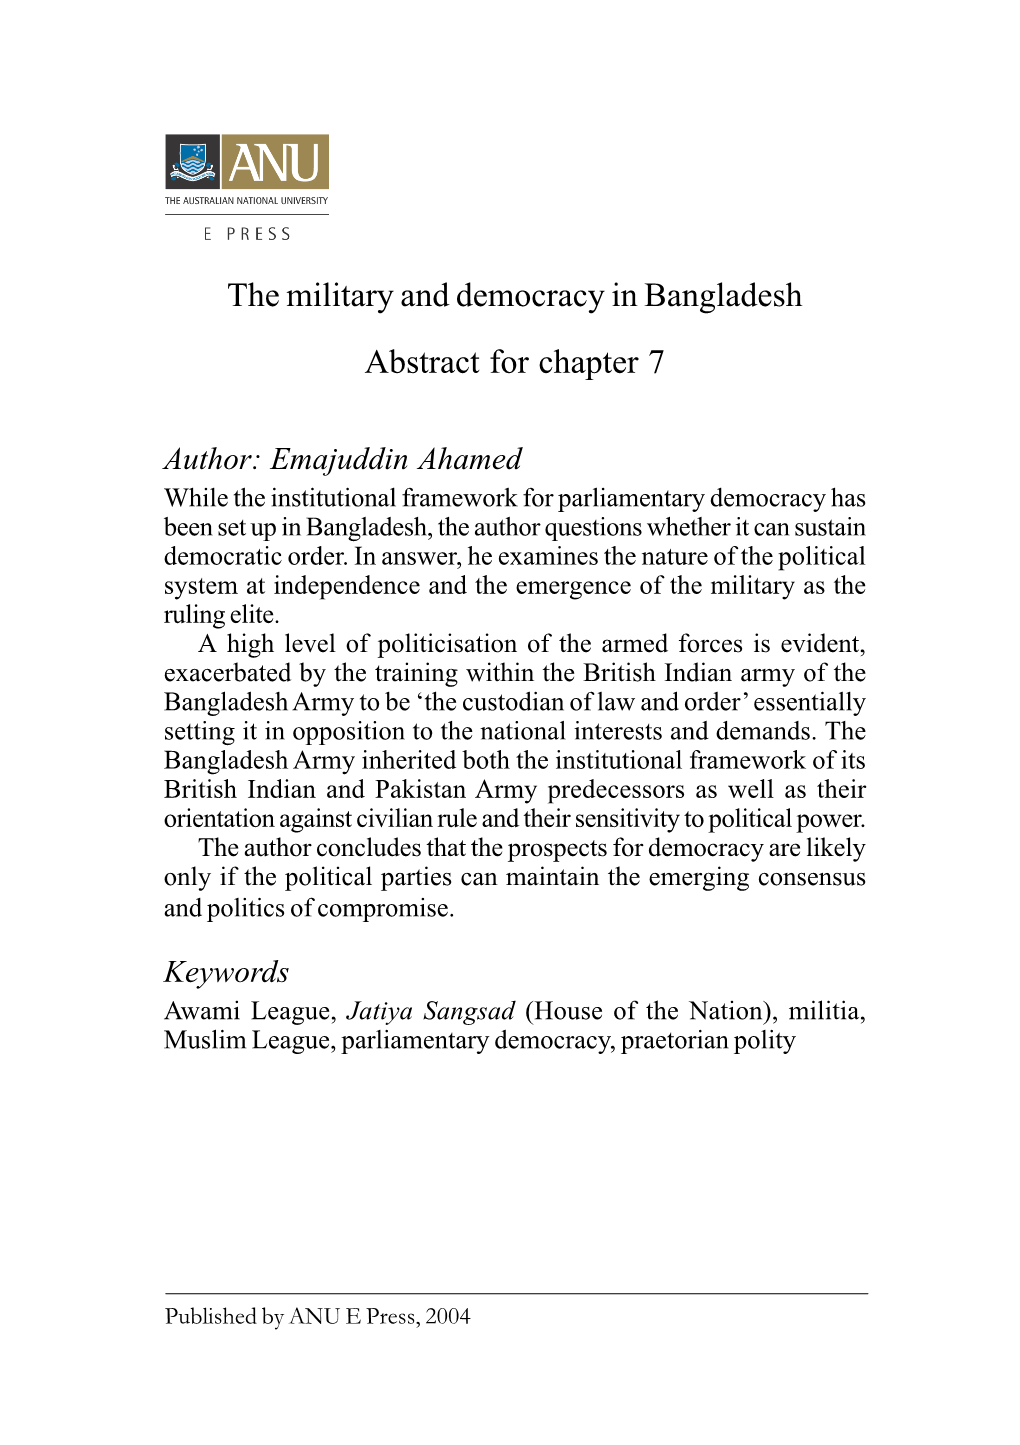 The Military and Democracy in Bangladesh Abstract for Chapter 7